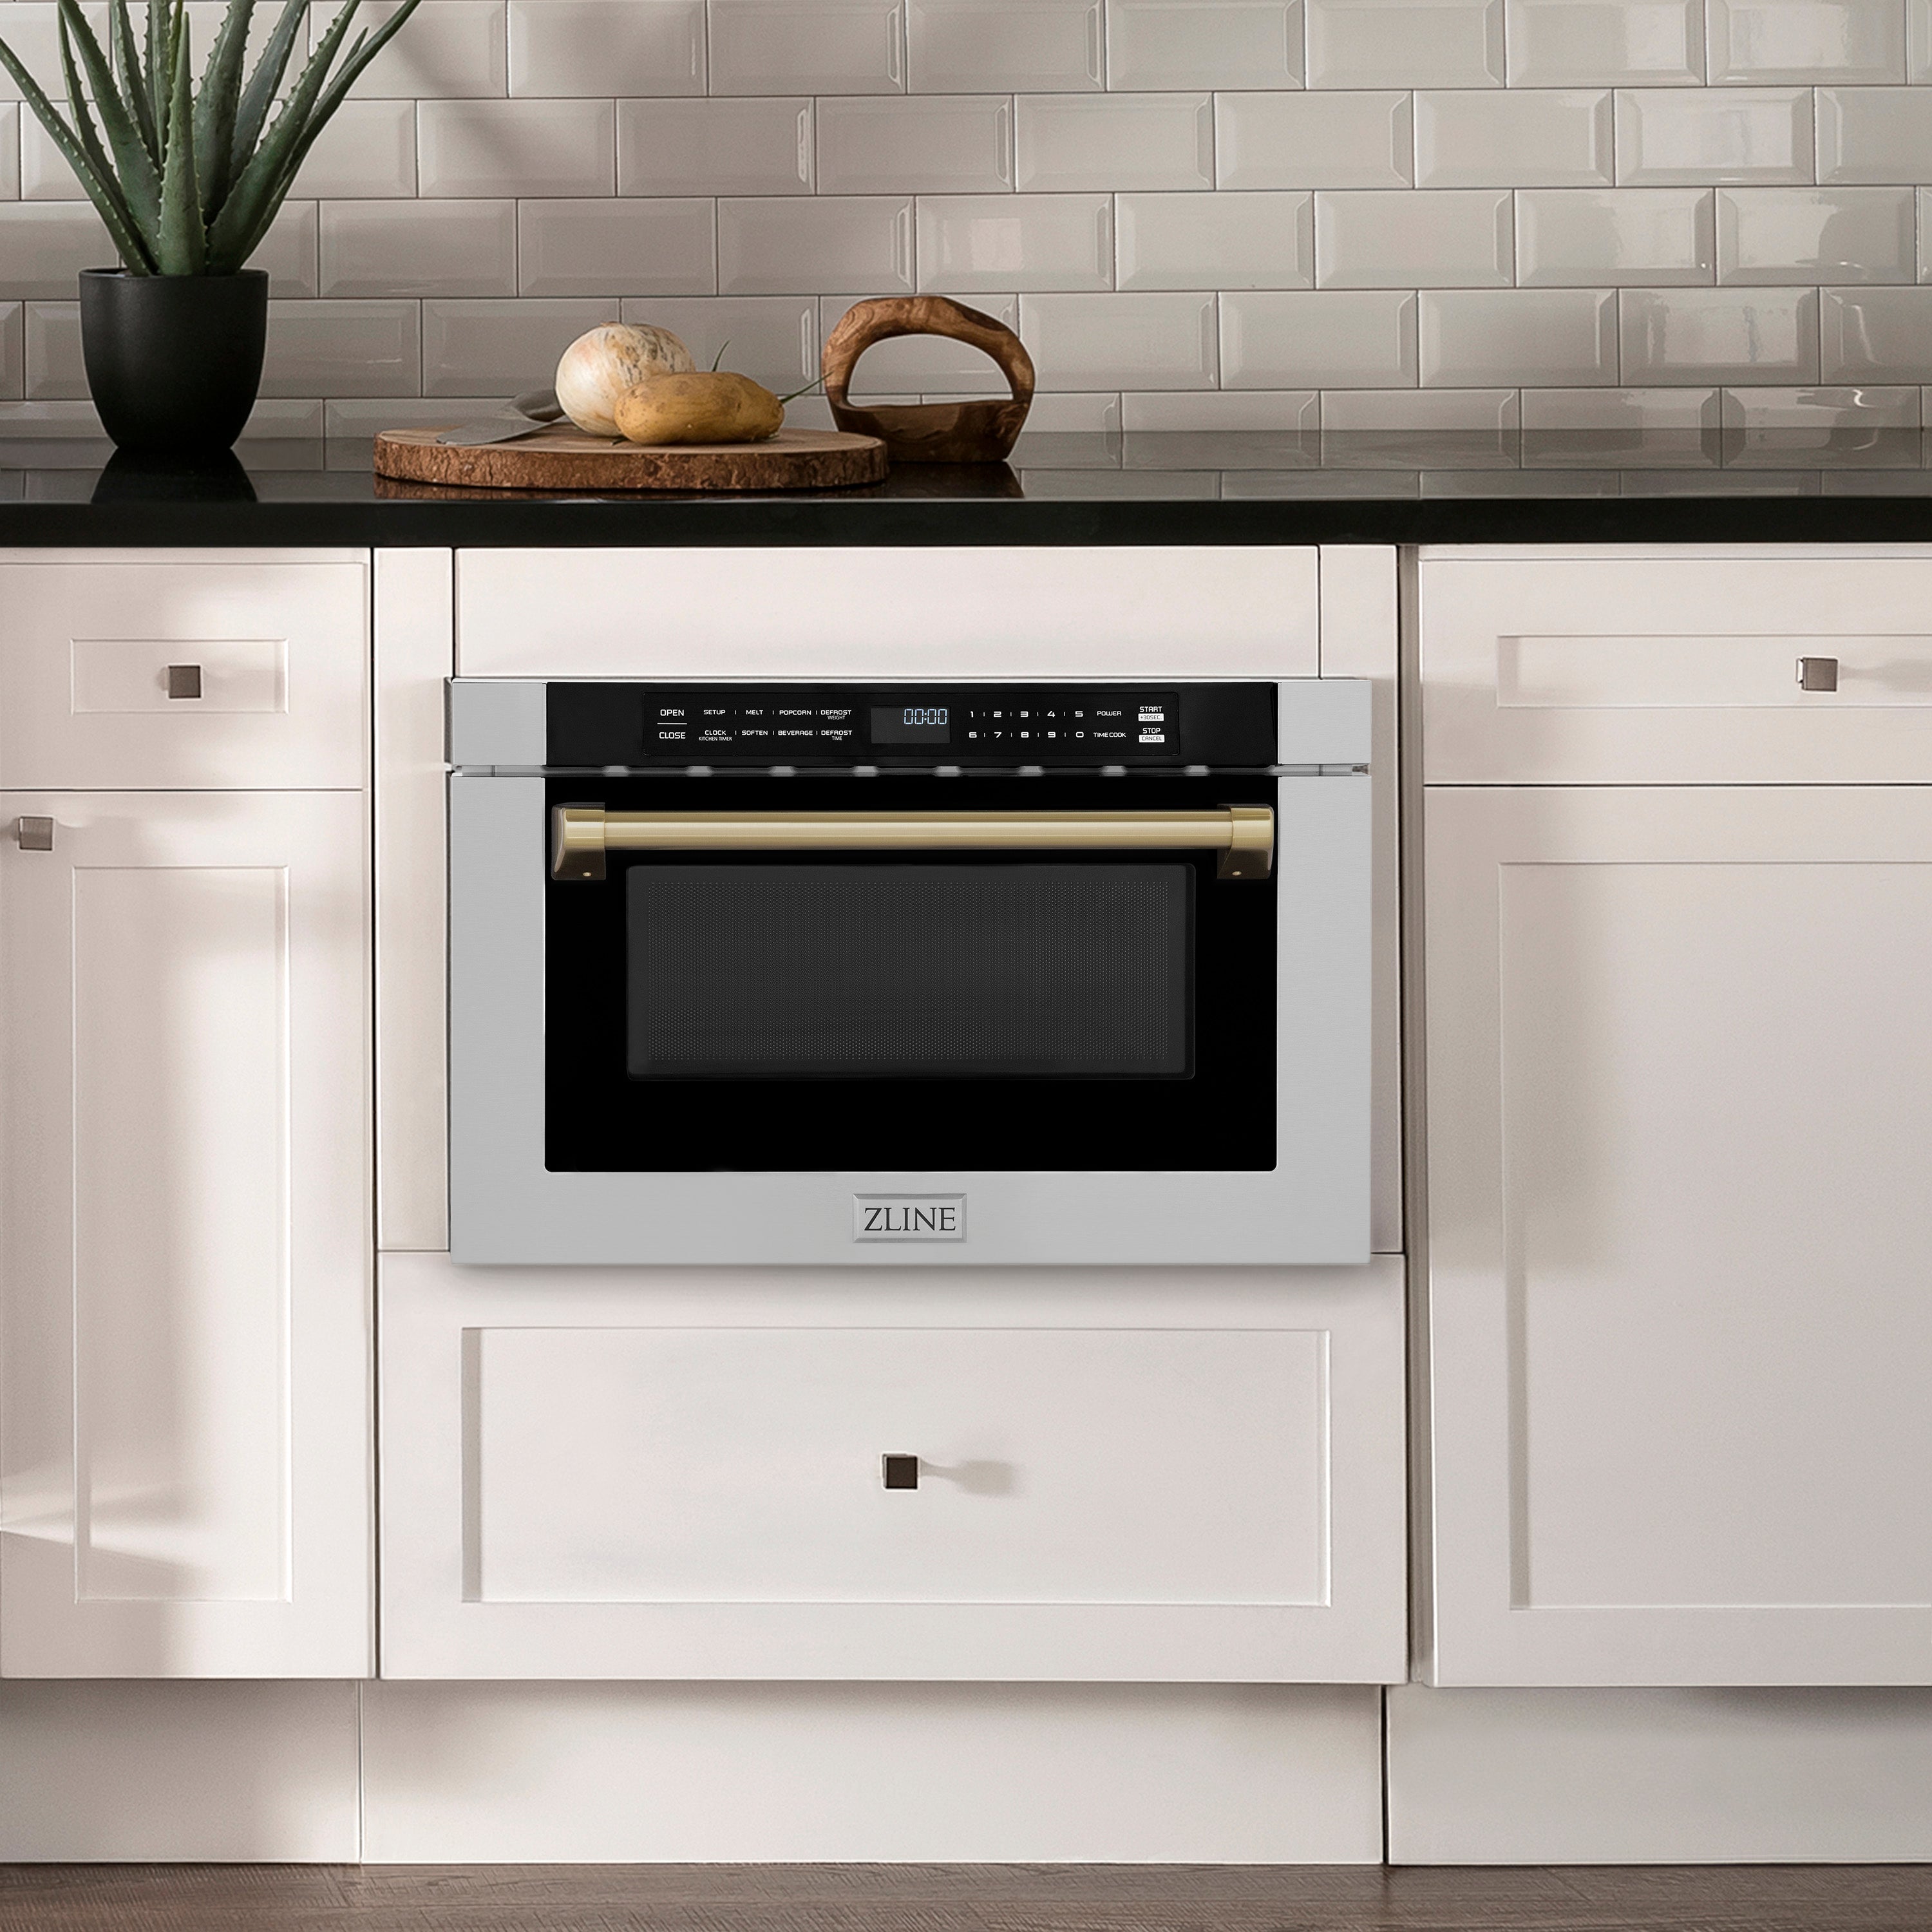 ZLINE Autograph Edition 24 in. 1.2 cu. ft. Built-in Microwave Drawer with a Traditional Handle in Stainless Steel and Champagne Bronze Accents (MWDZ-1-H-CB) in Rustic Farmhouse Style Kitchen with white cabinets and black countertops.